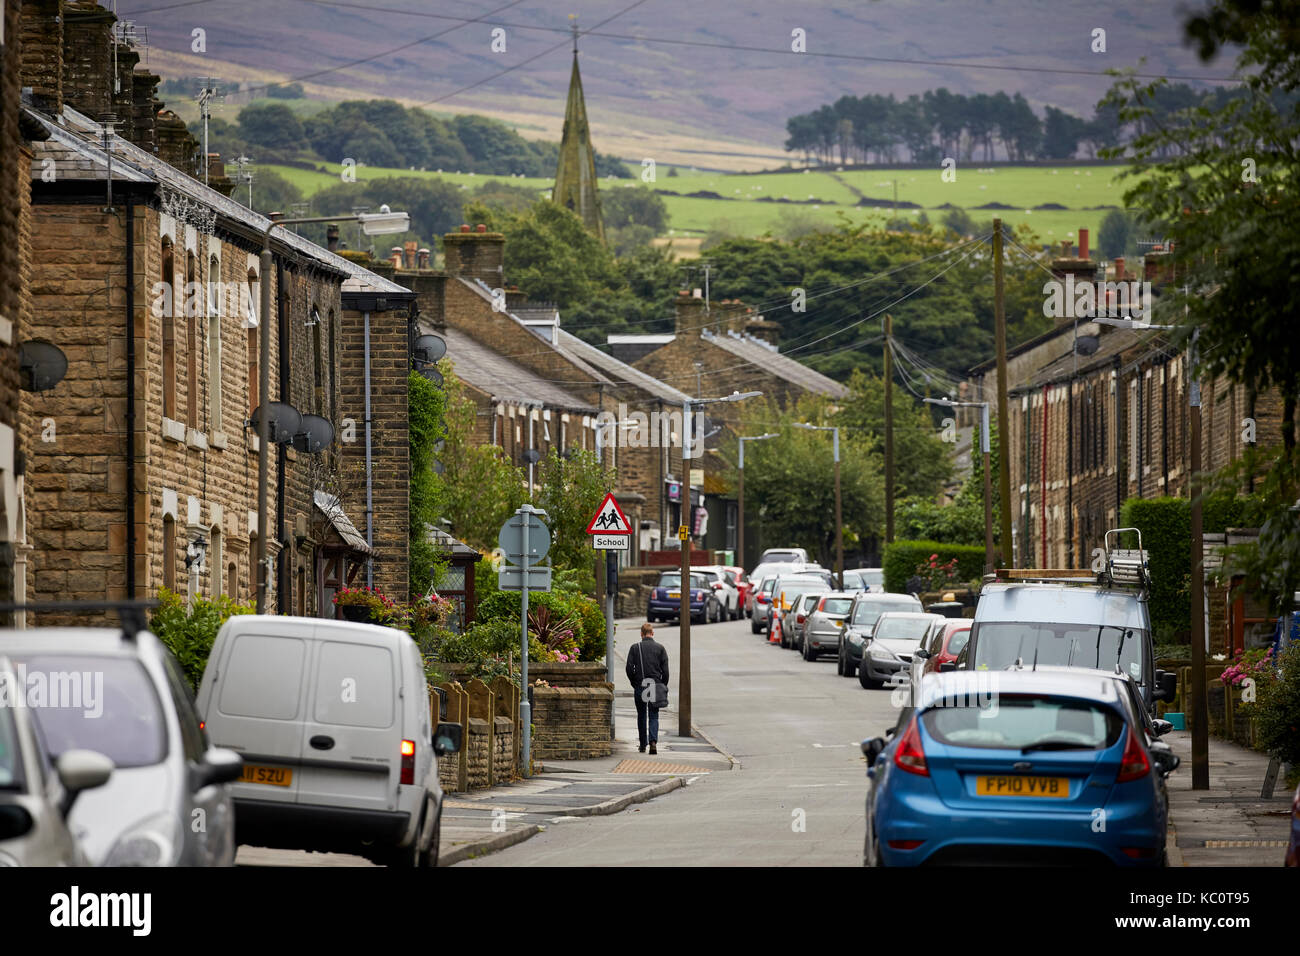 Pikes lane typical stone terraced housing stock view along a residential street in Glossop, Derbyshire. Stock Photo